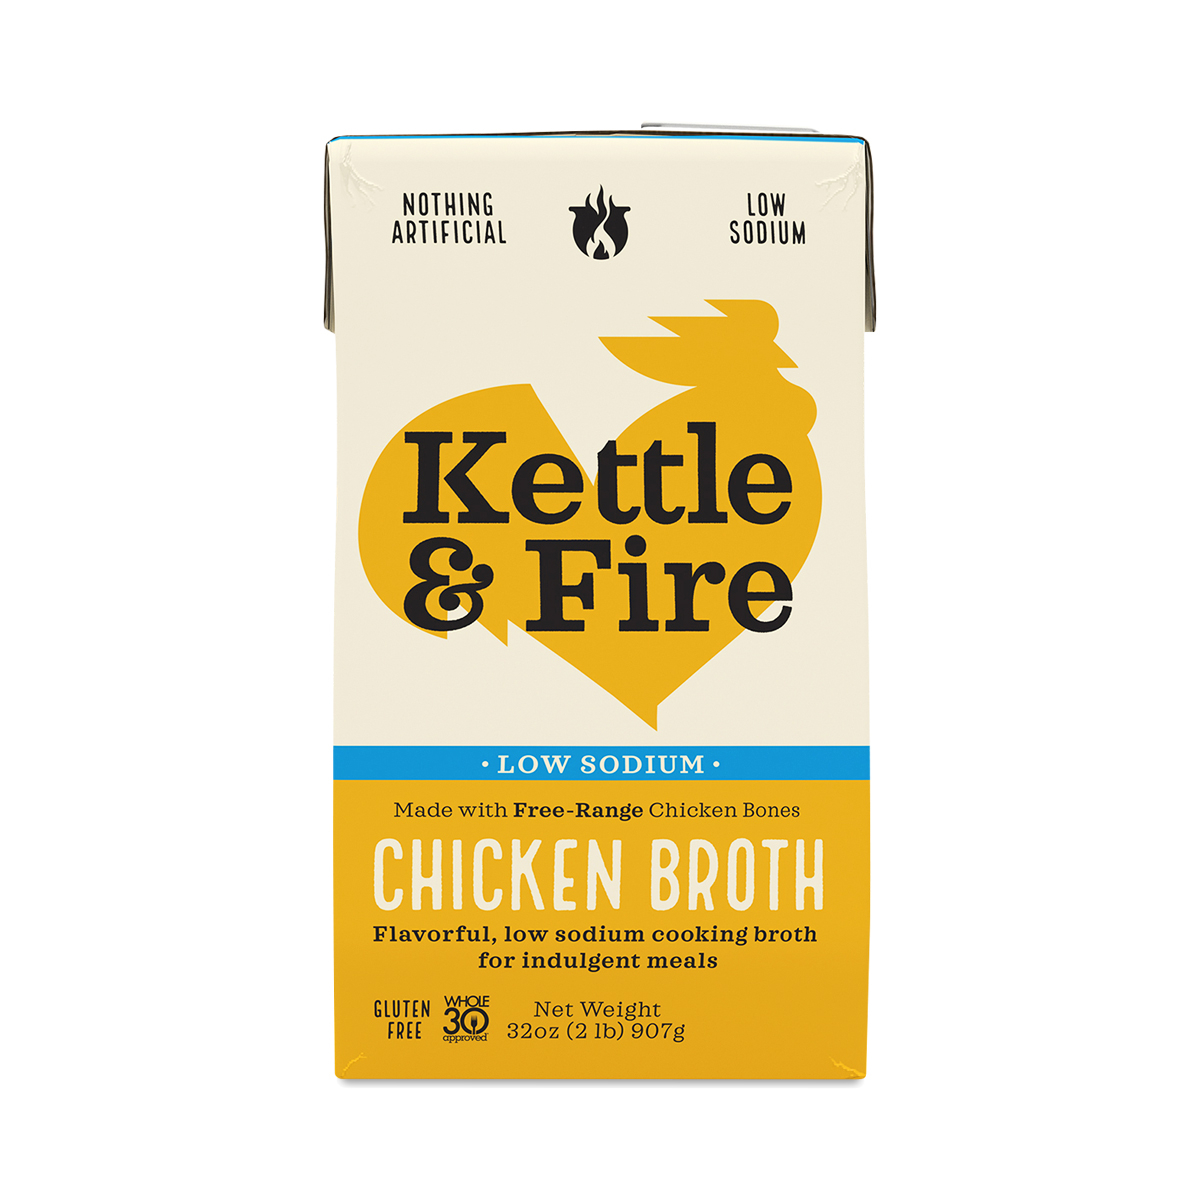 Kettle & Fire Low Sodium Cooking Broth, Chicken 32 fl oz carton